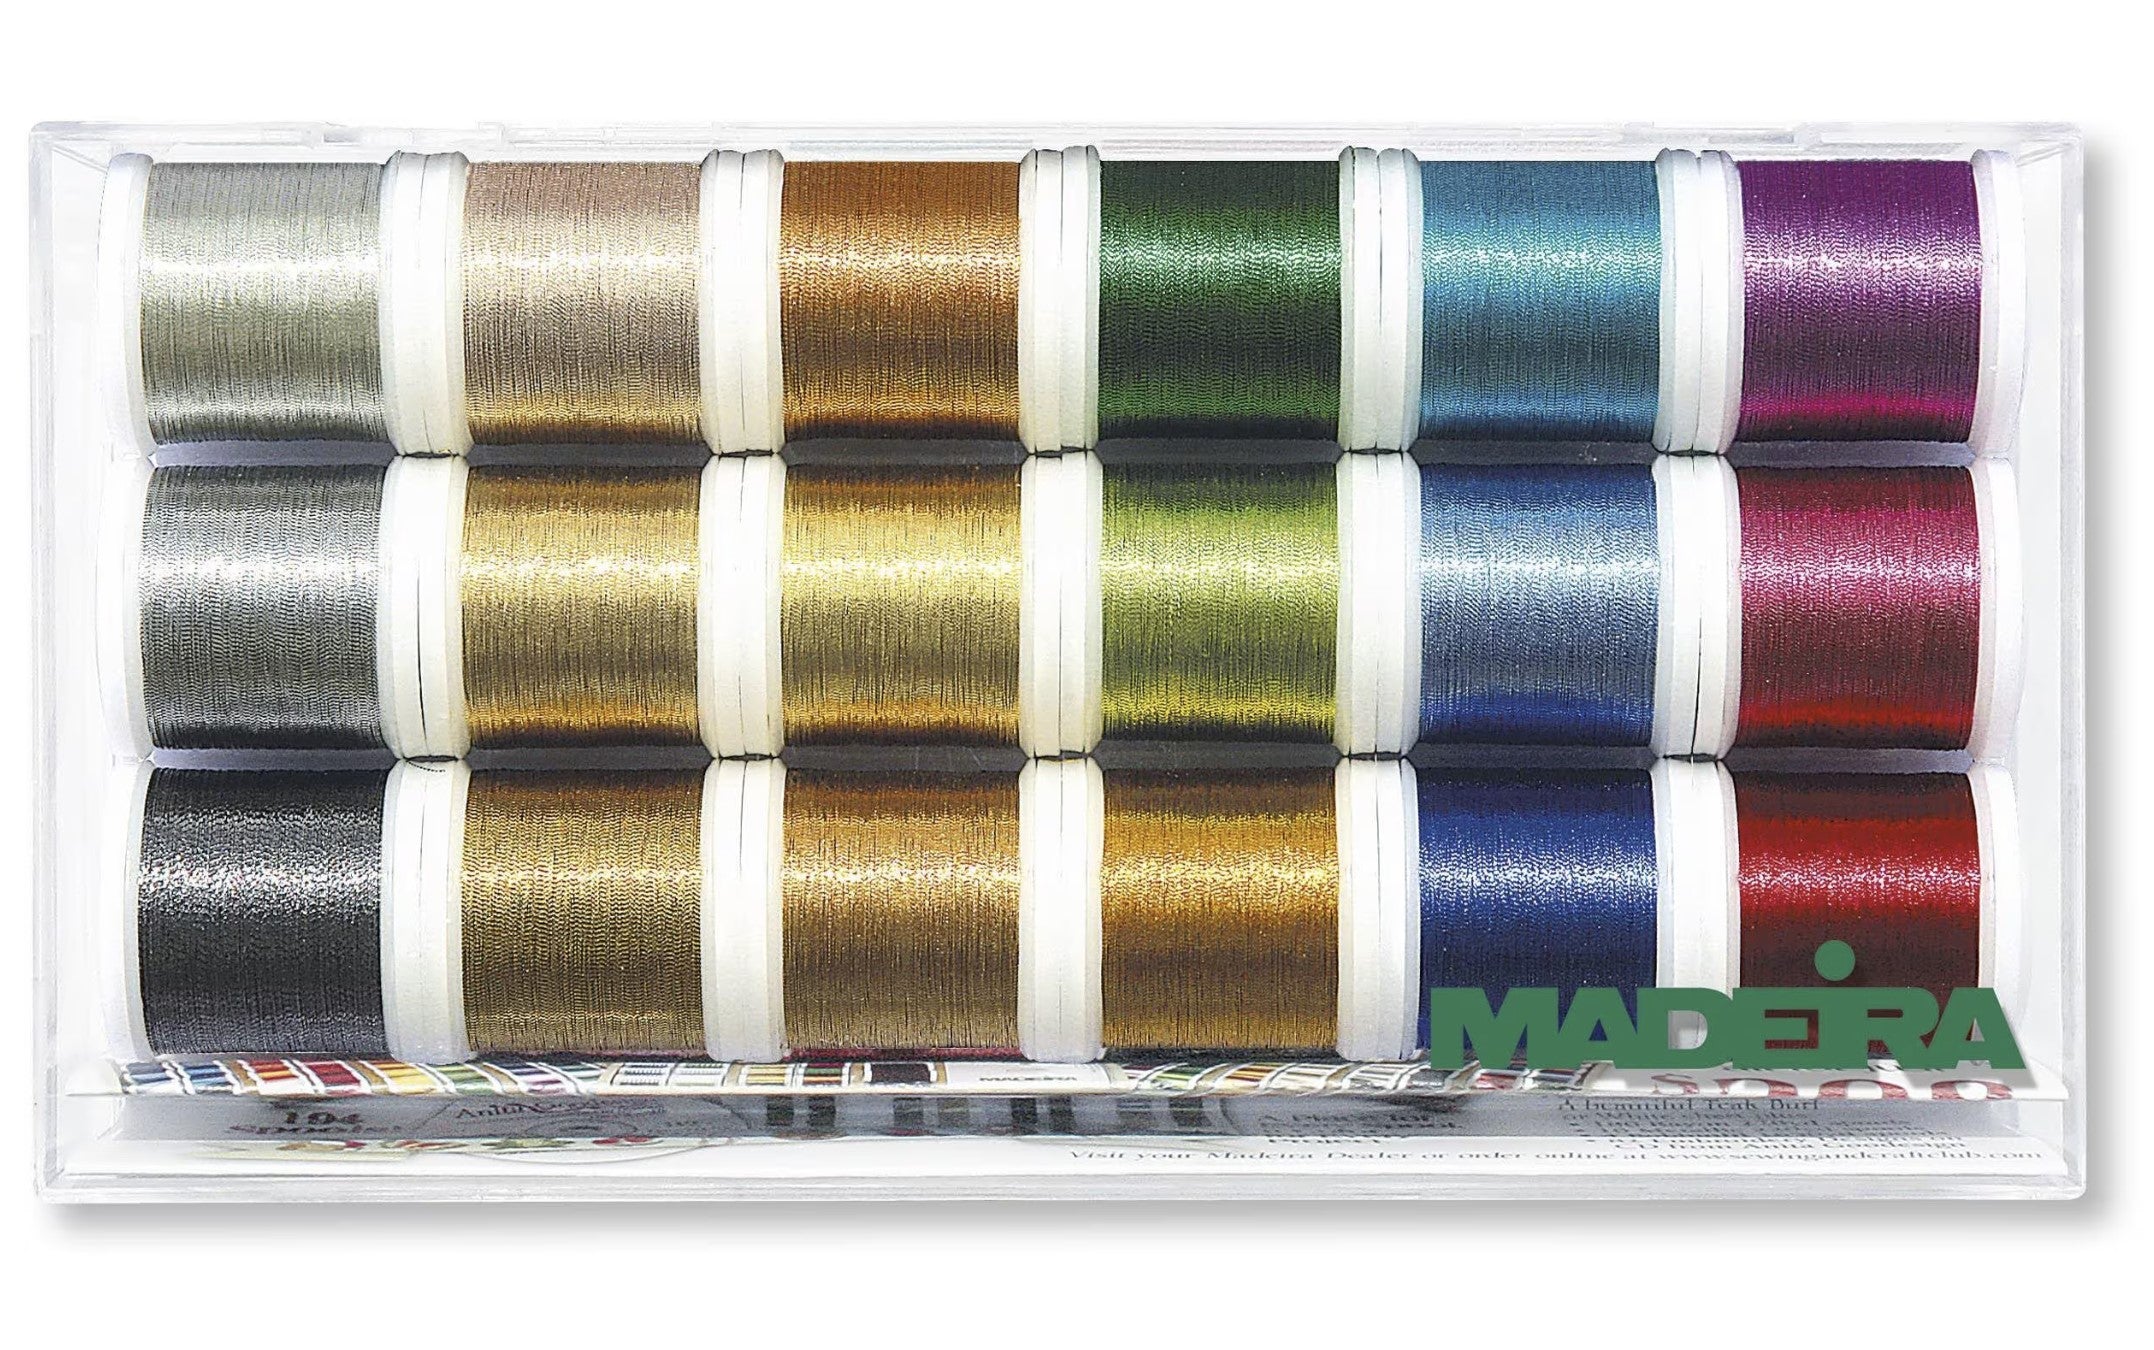 Assortment Metallic Smooth -- Machine Embroidery Threads -- Clear Box, 18 units (#40 Weight, Ref. MA8021) by MADEIRA®